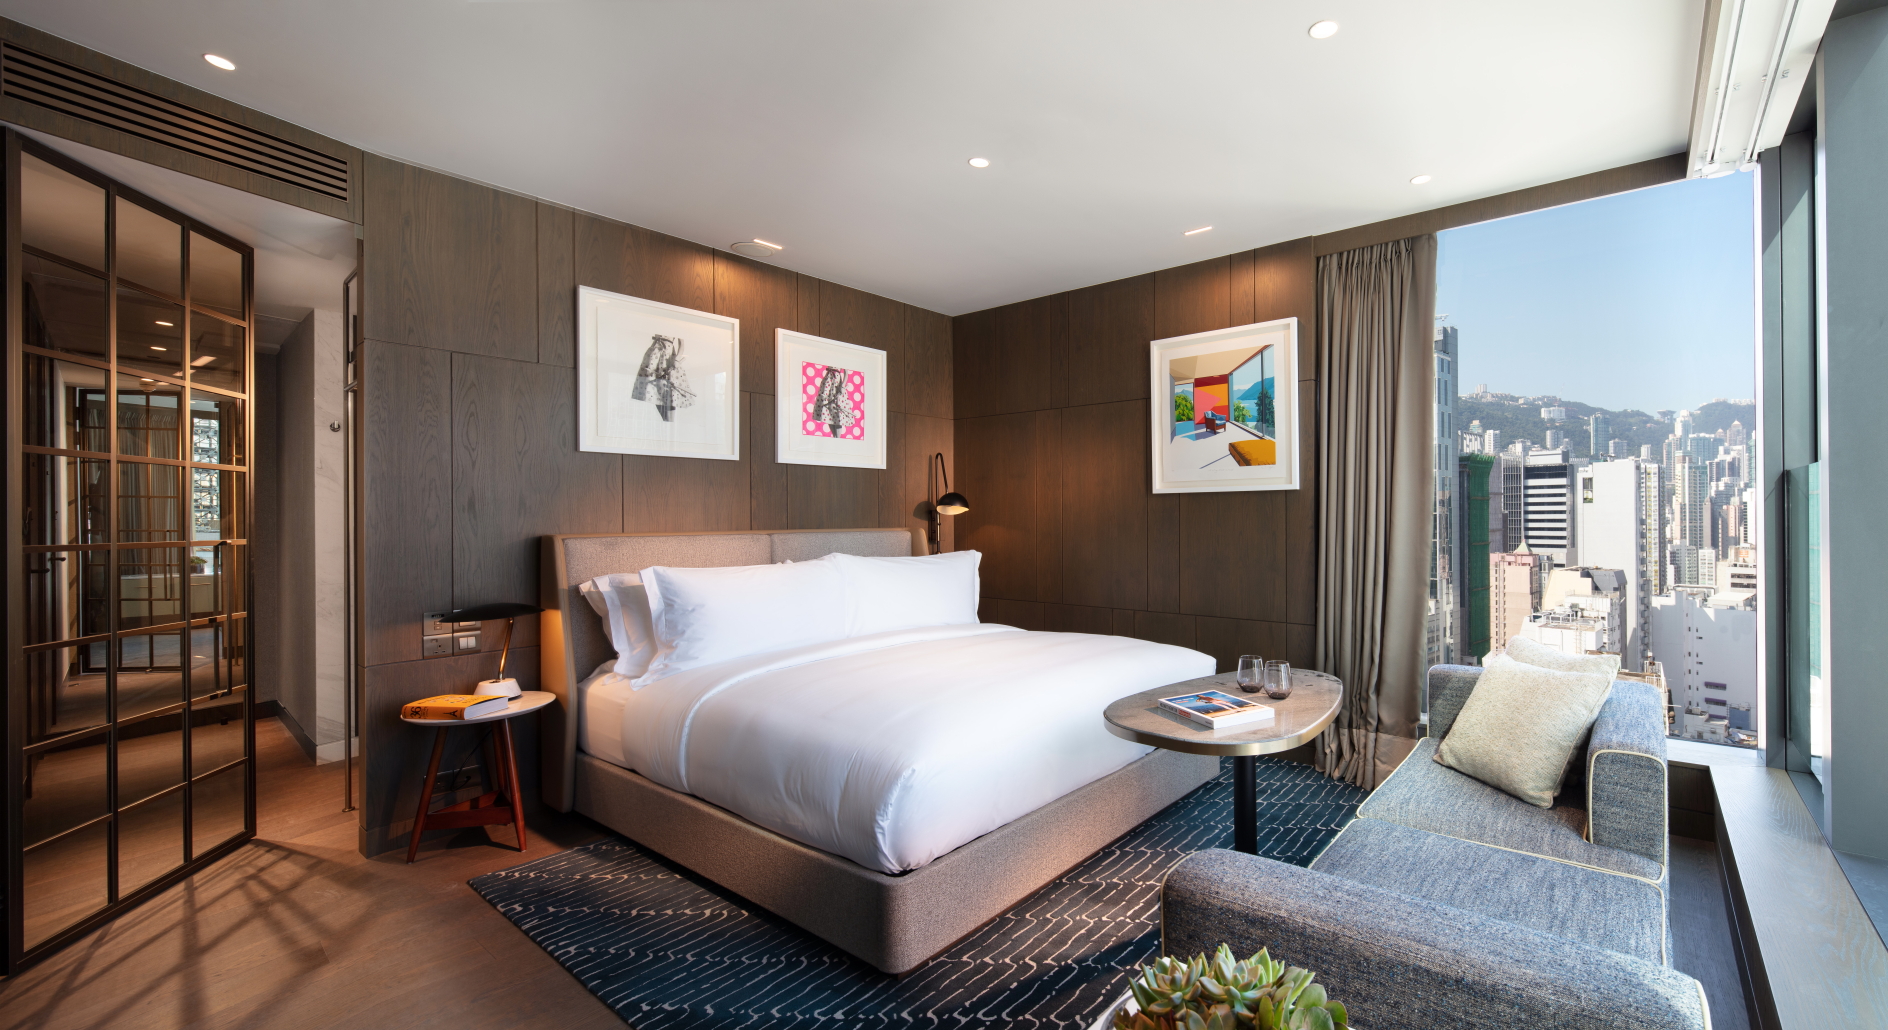 Corner Rooms, larger than the standard guestrooms, have been designed with an open layout and the addition of a dressing room. Corner Rooms offer views of Causeway Bay district, whilst Premium Corner Rooms overlook Wan Chai and Admiralty. Click to enlarge.